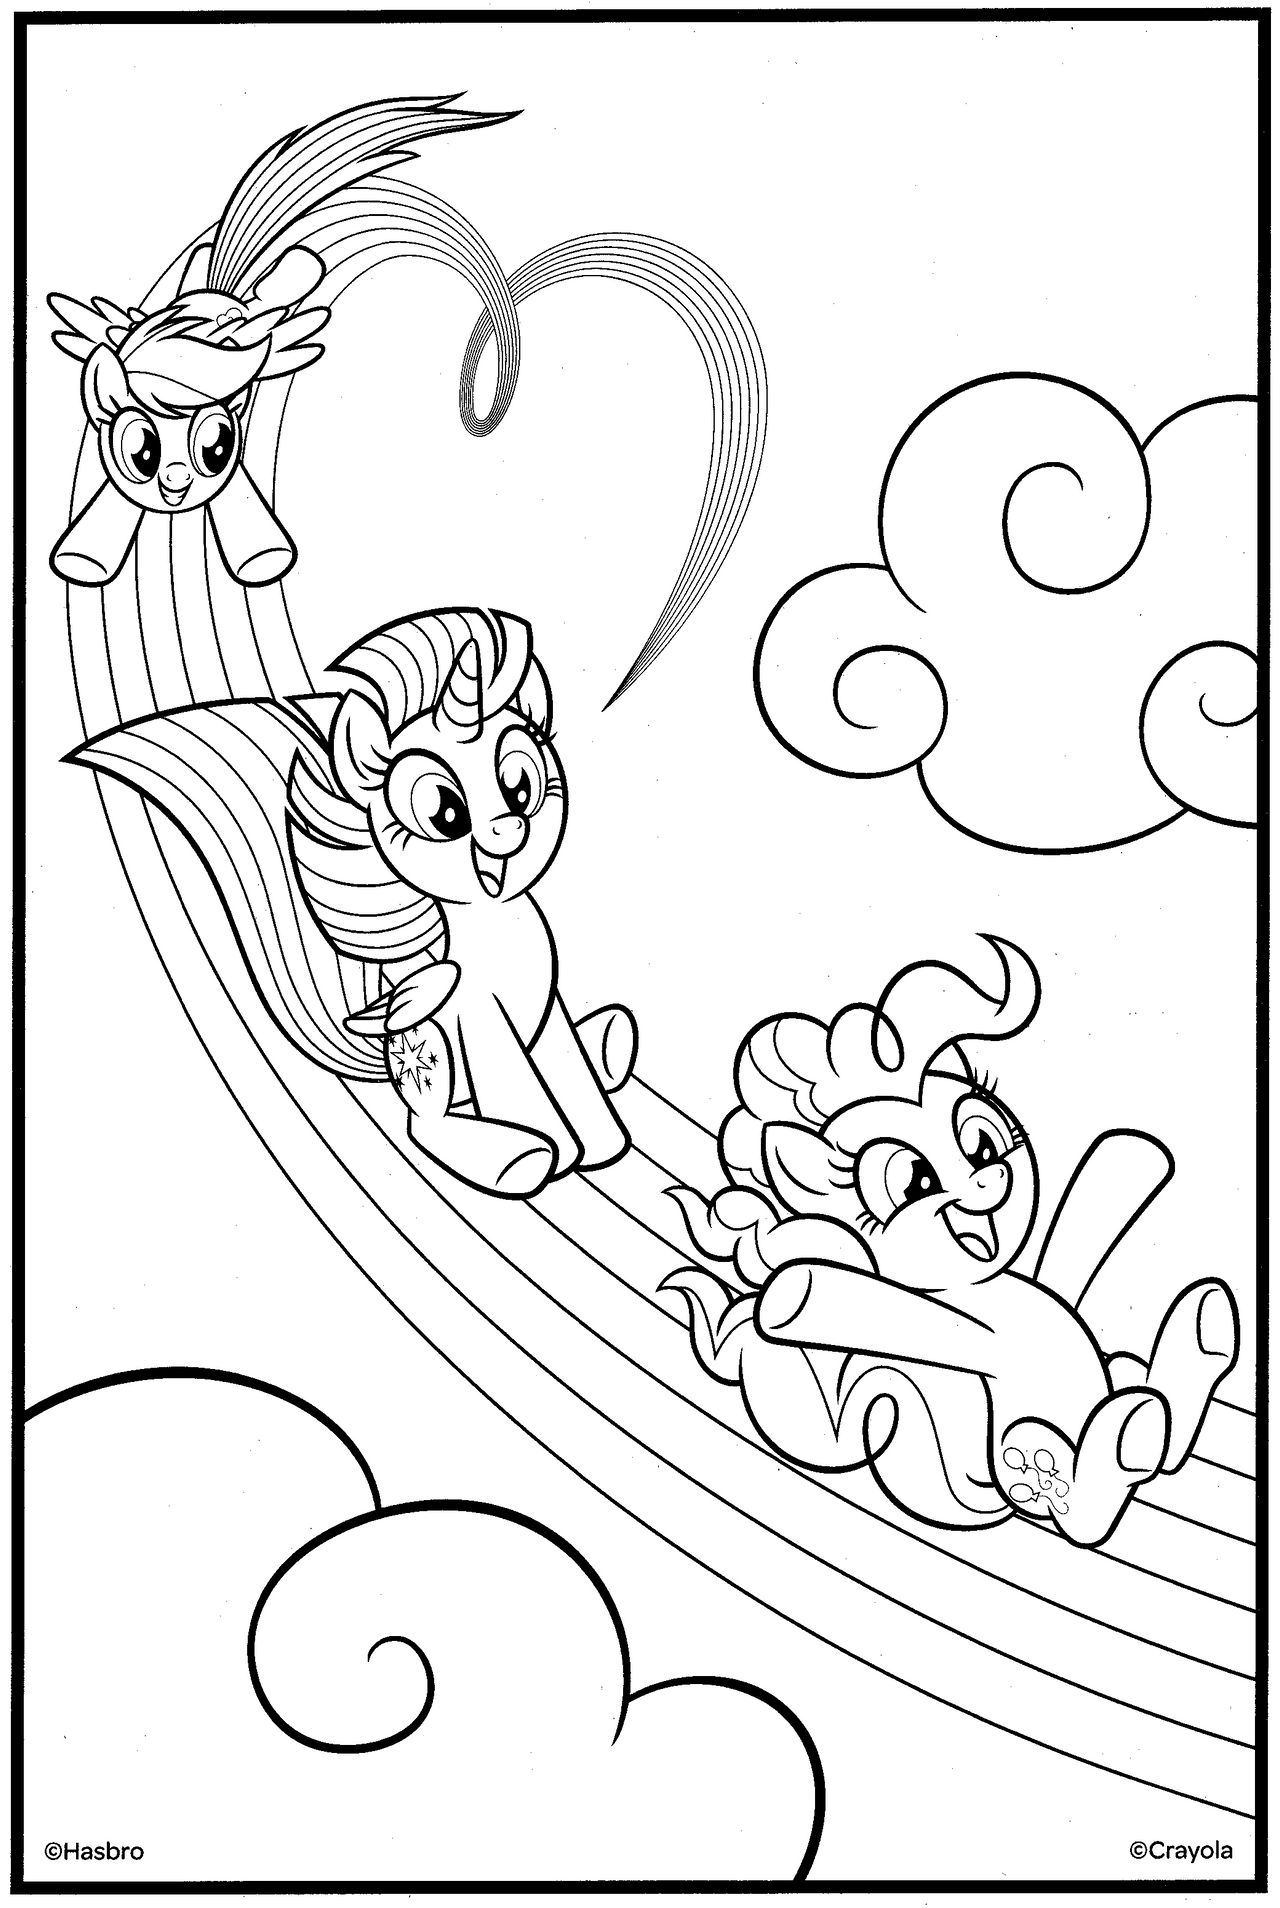 046 MLP My Little Pony coloring page by magnificent-coloring on DeviantArt